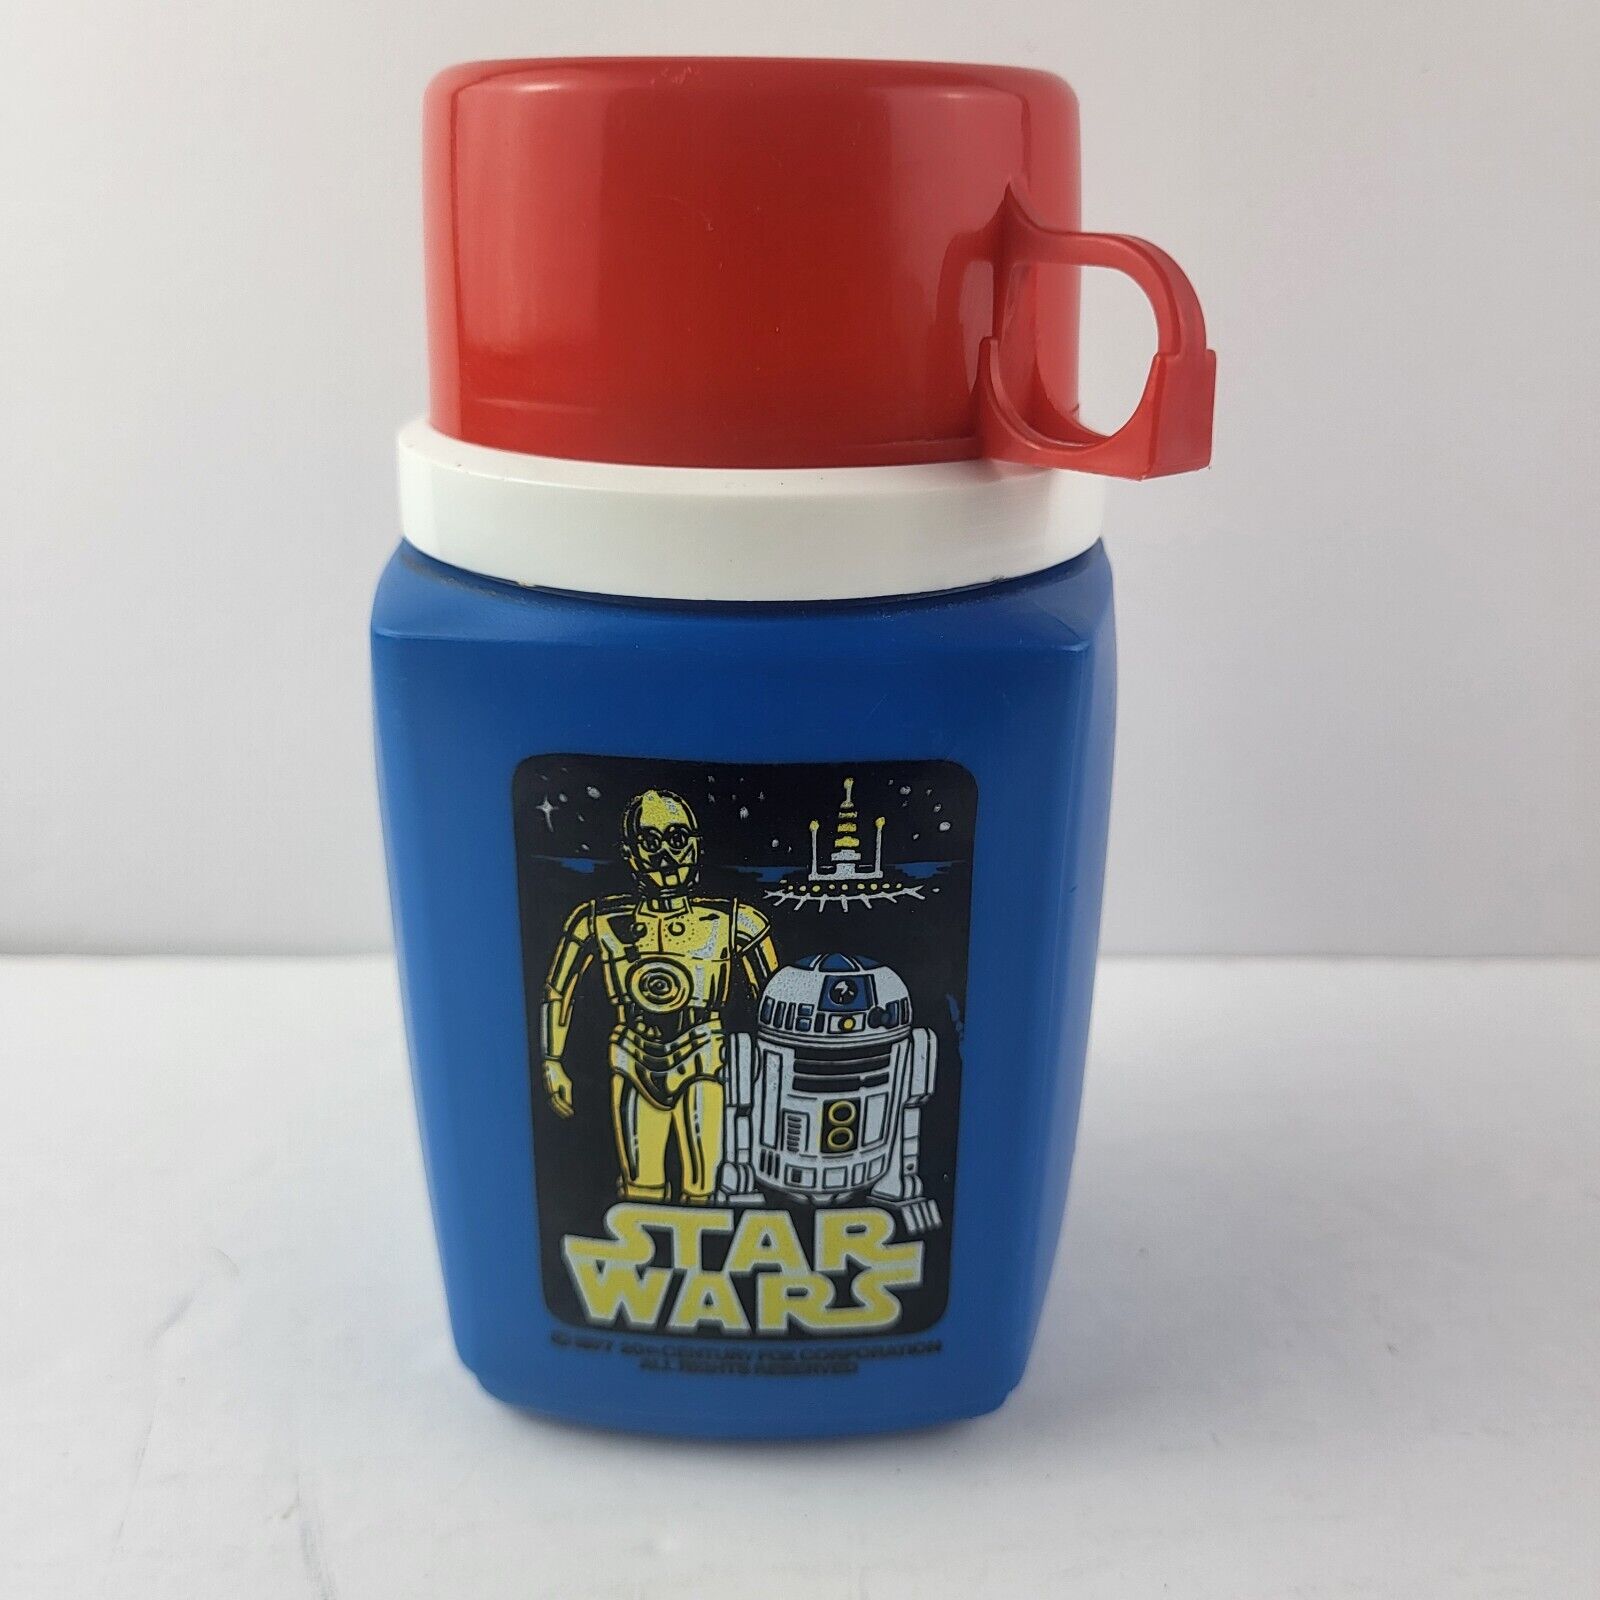 Vintage Star Wars Plastic Blue Thermos 1977 Yellow Letters Red Cap Cup Lid